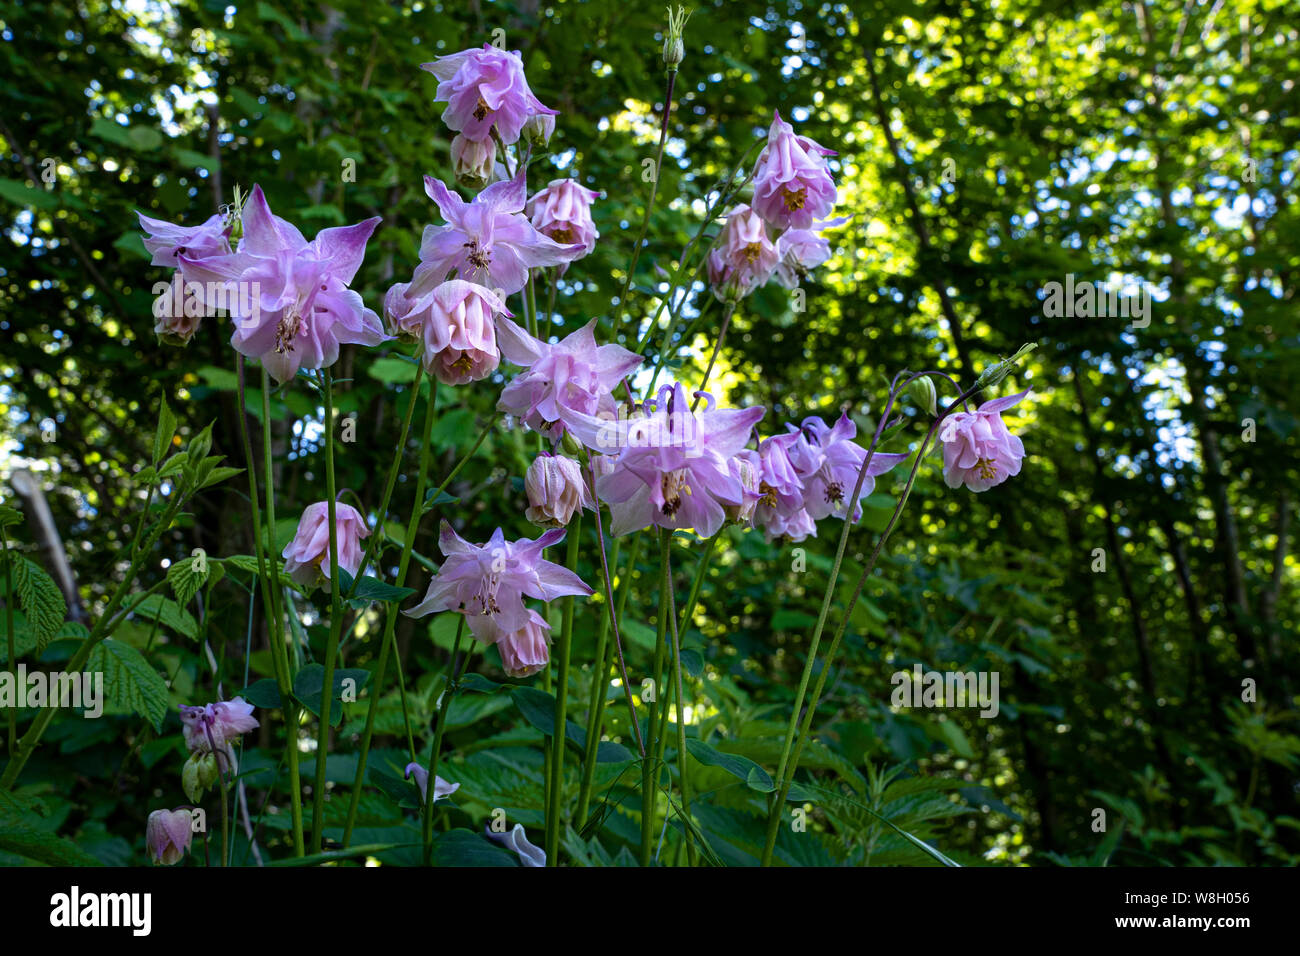 Lilac wild flowers in the forest Stock Photo